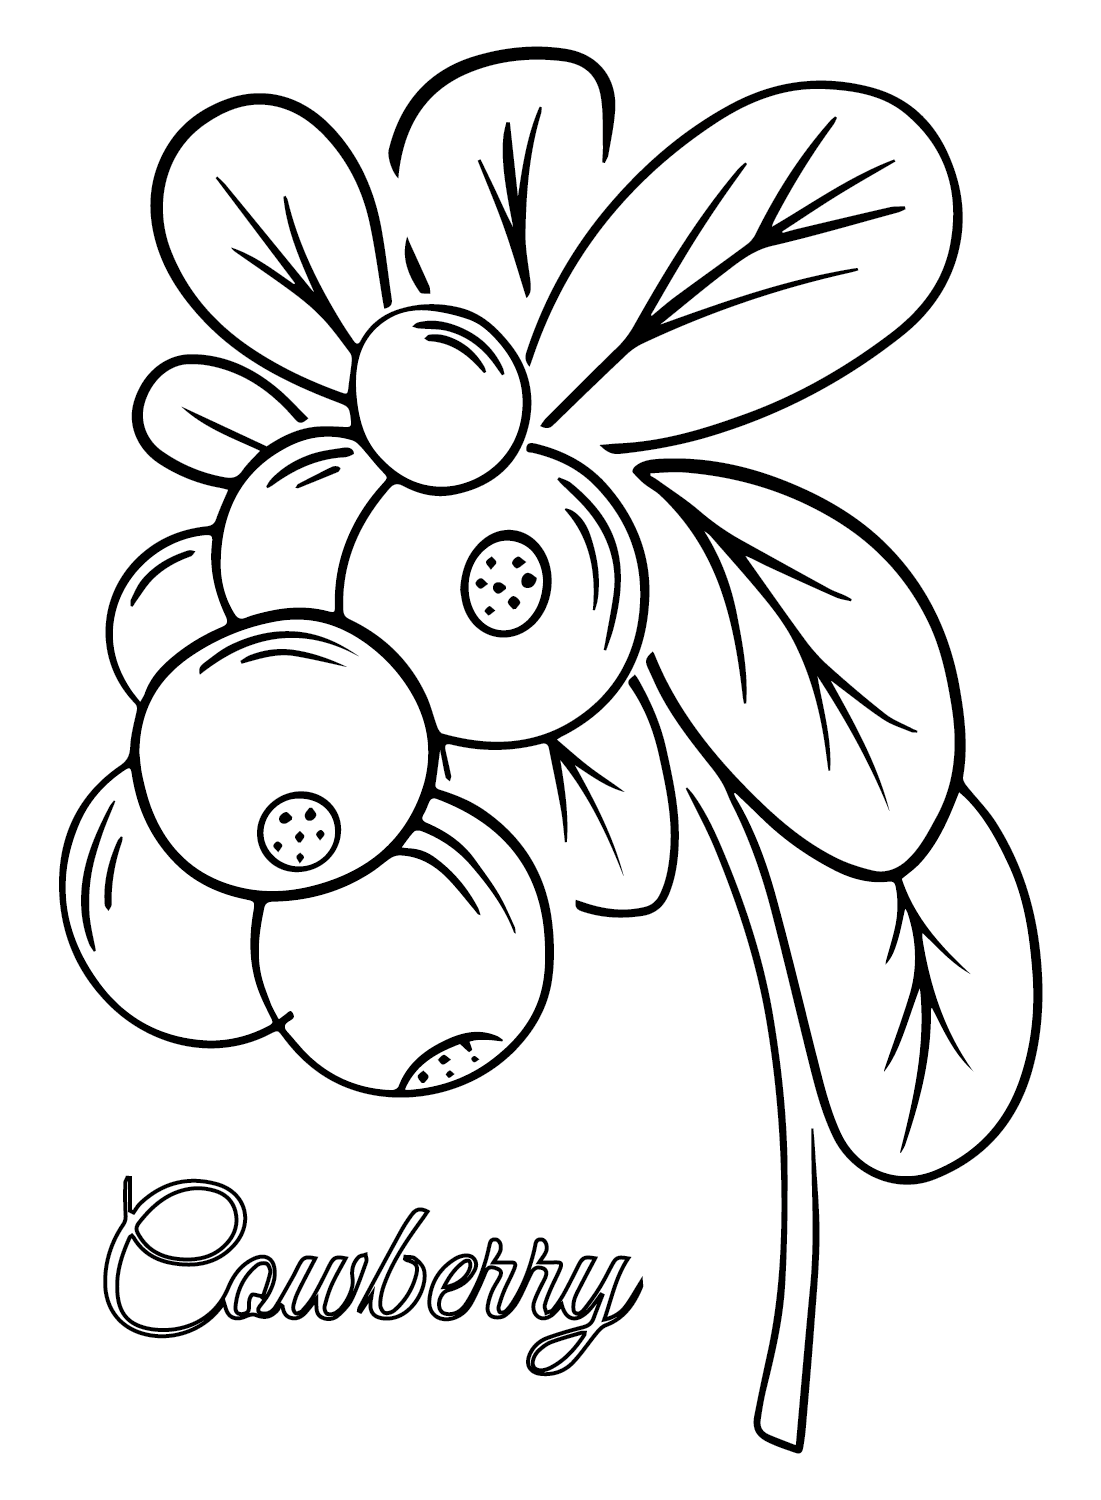 Cranberry color Sheets Coloring Page